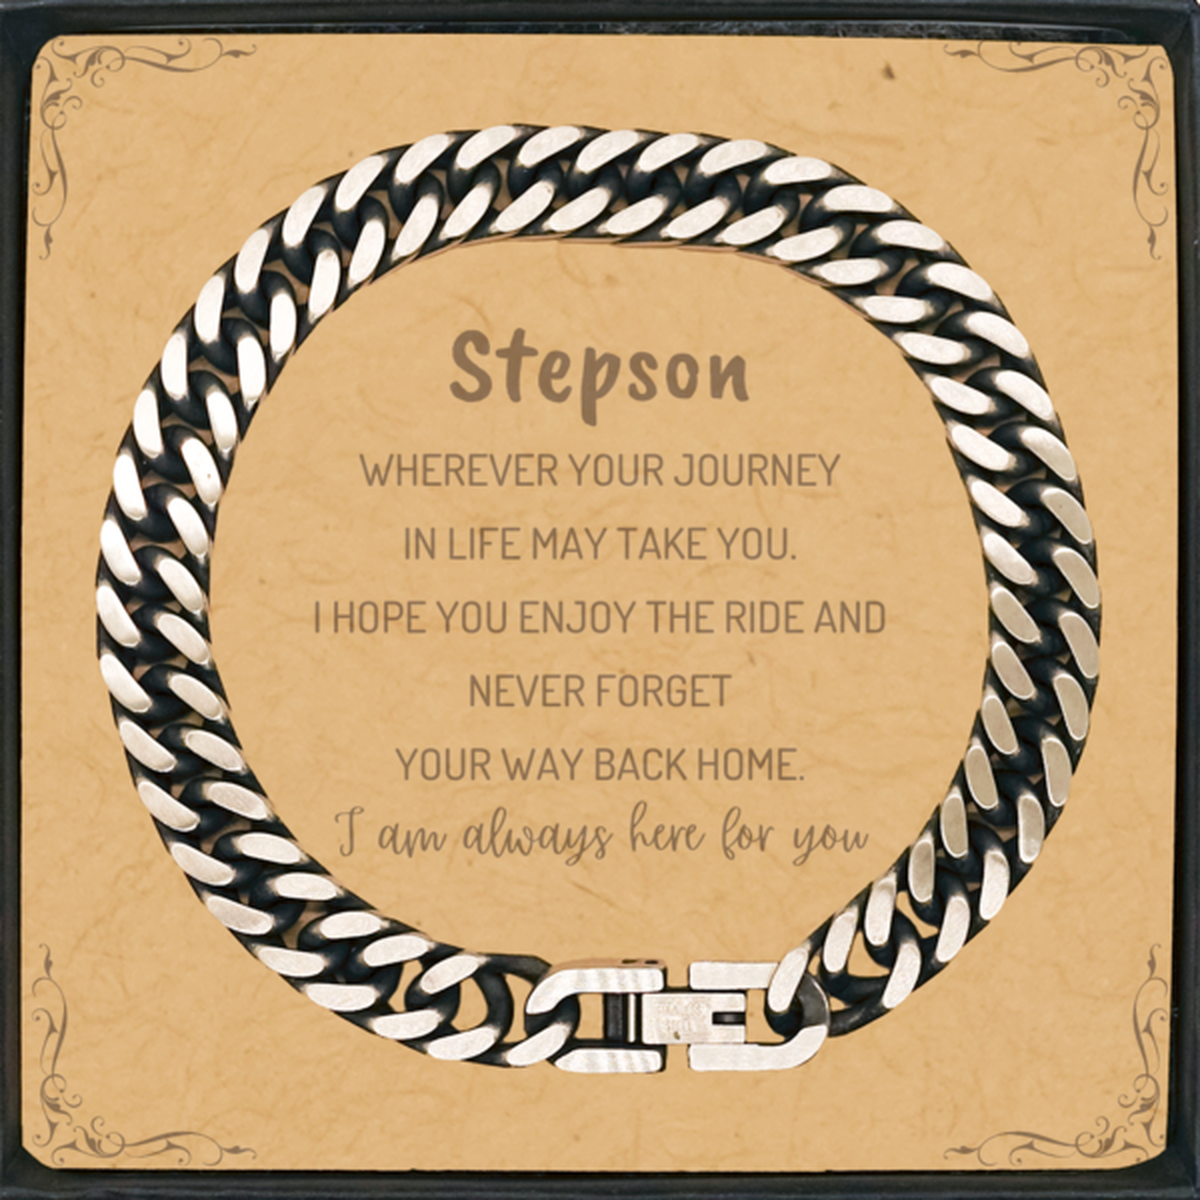 Stepson wherever your journey in life may take you, I am always here for you Stepson Cuban Link Chain Bracelet, Awesome Christmas Gifts For Stepson Message Card, Stepson Birthday Gifts for Men Women Family Loved One